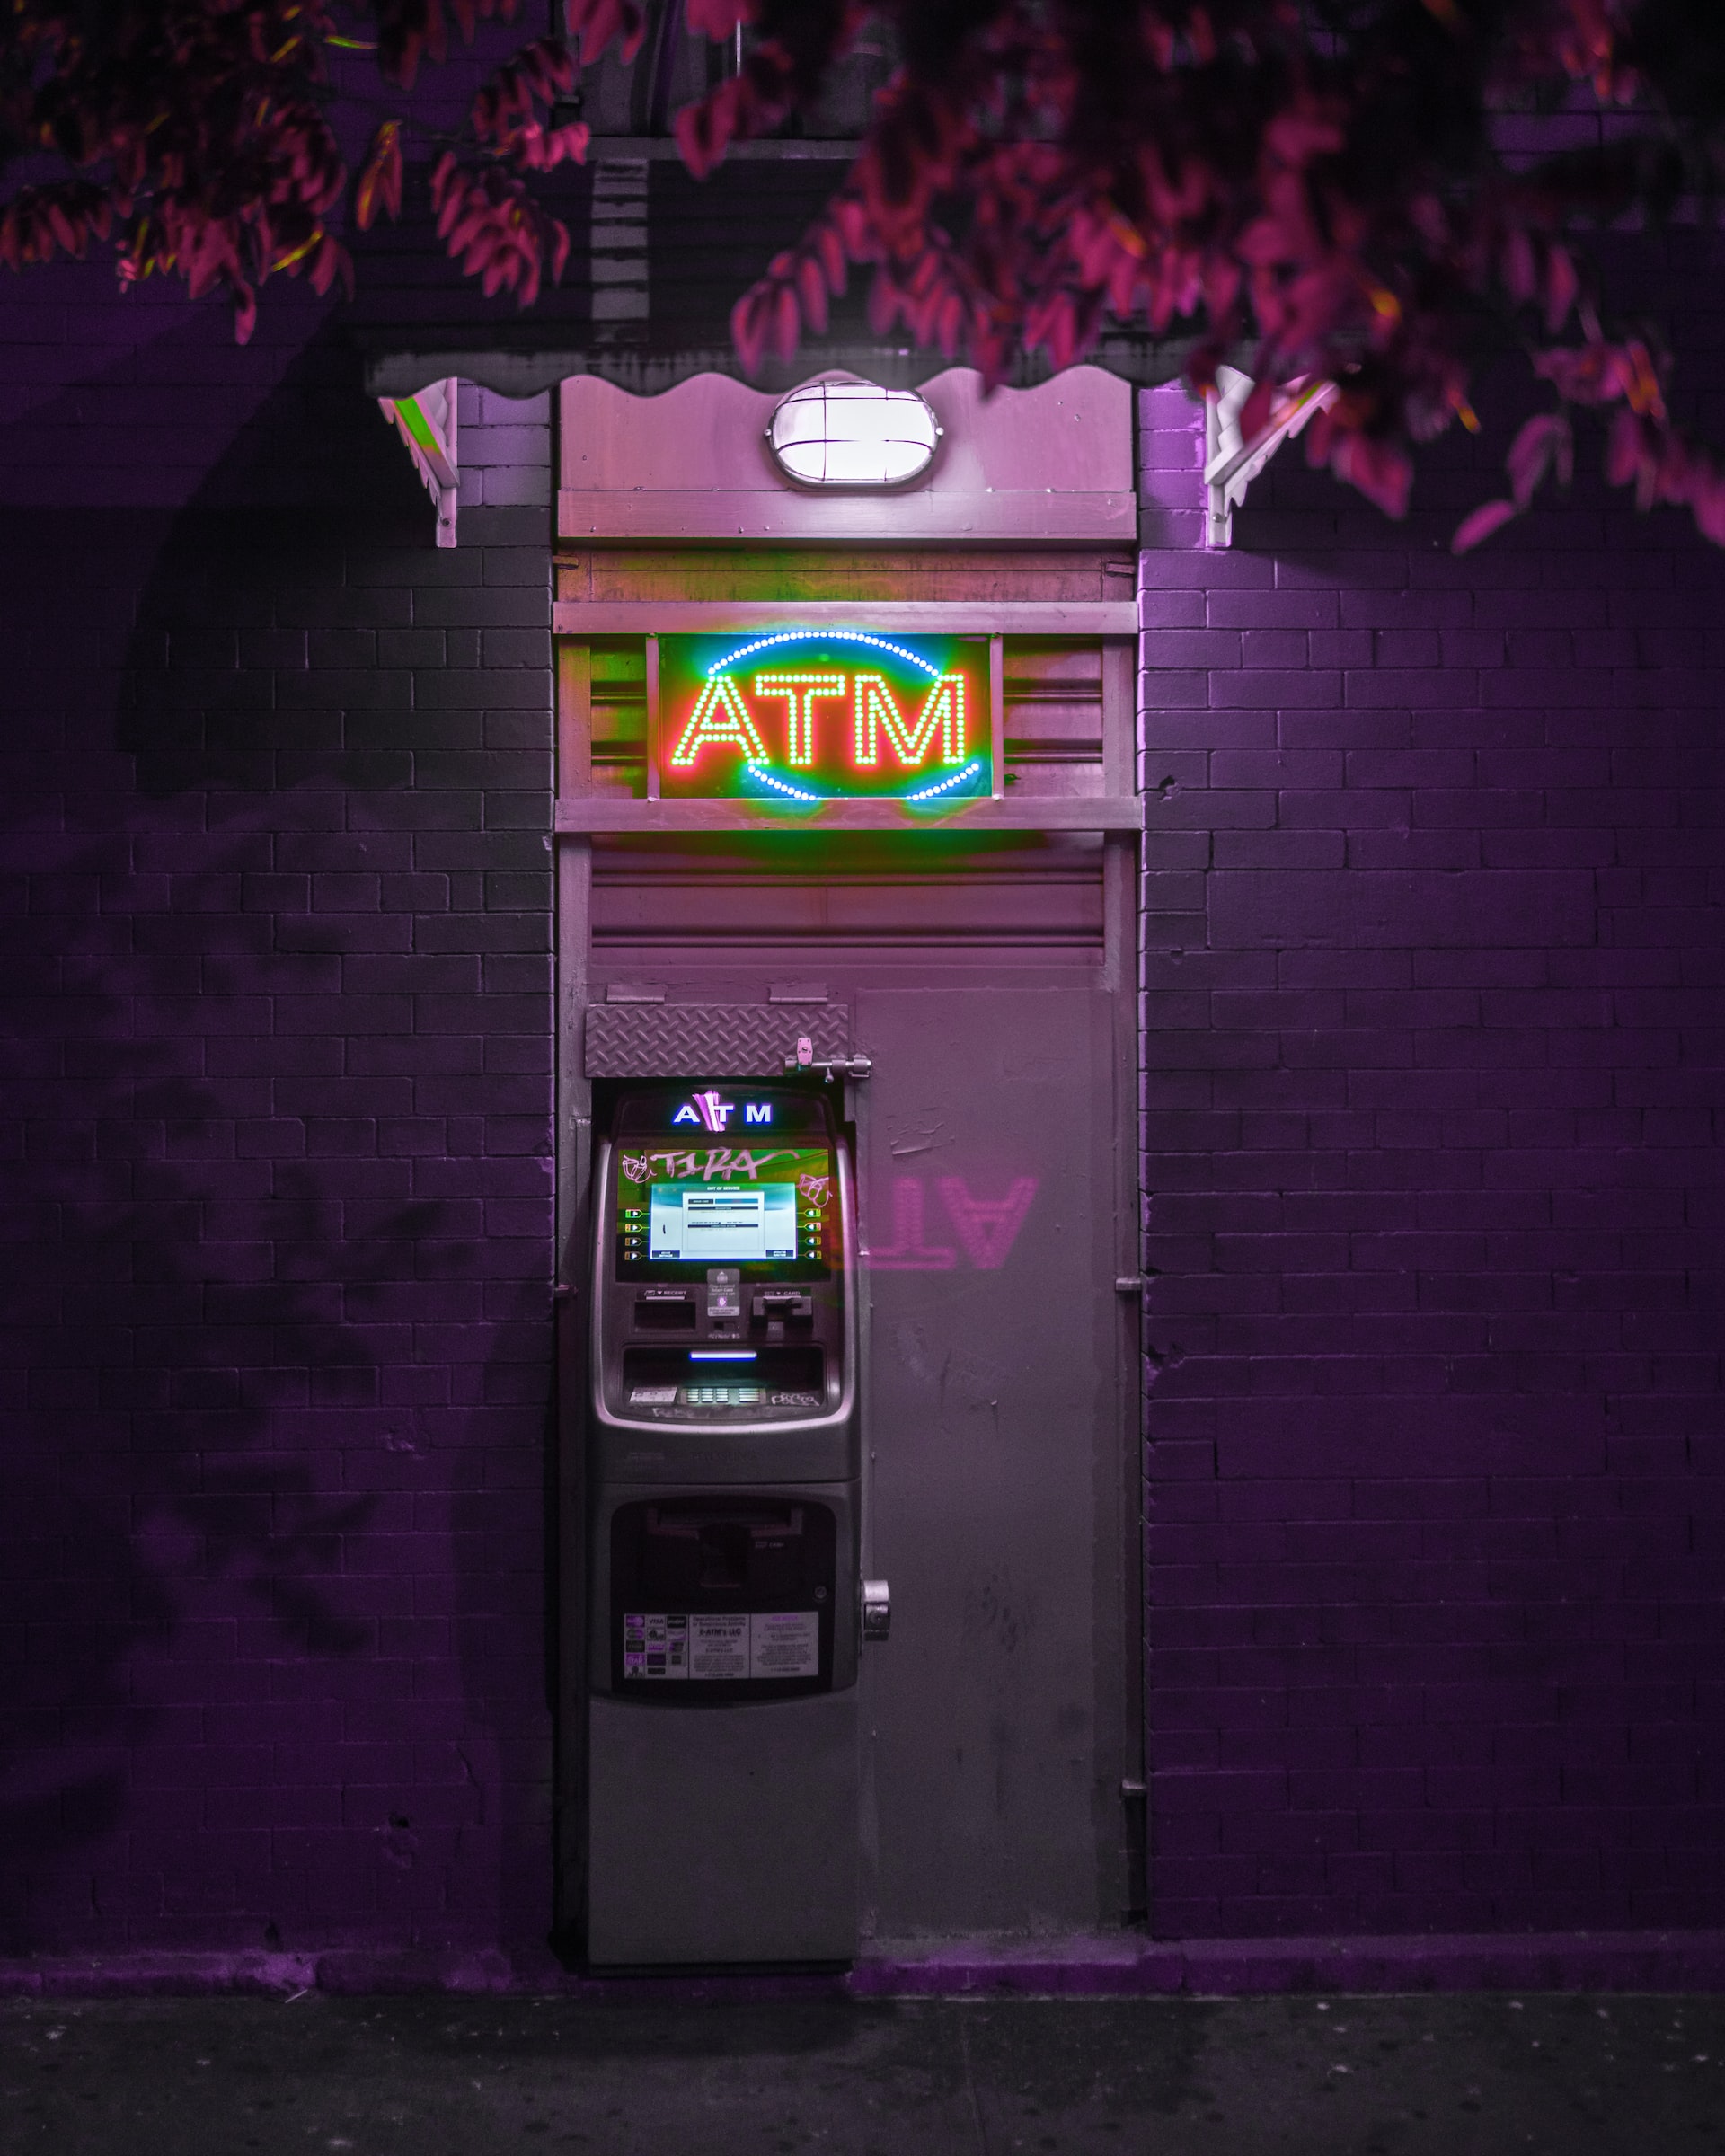 The Infrastructure Behind ATMs